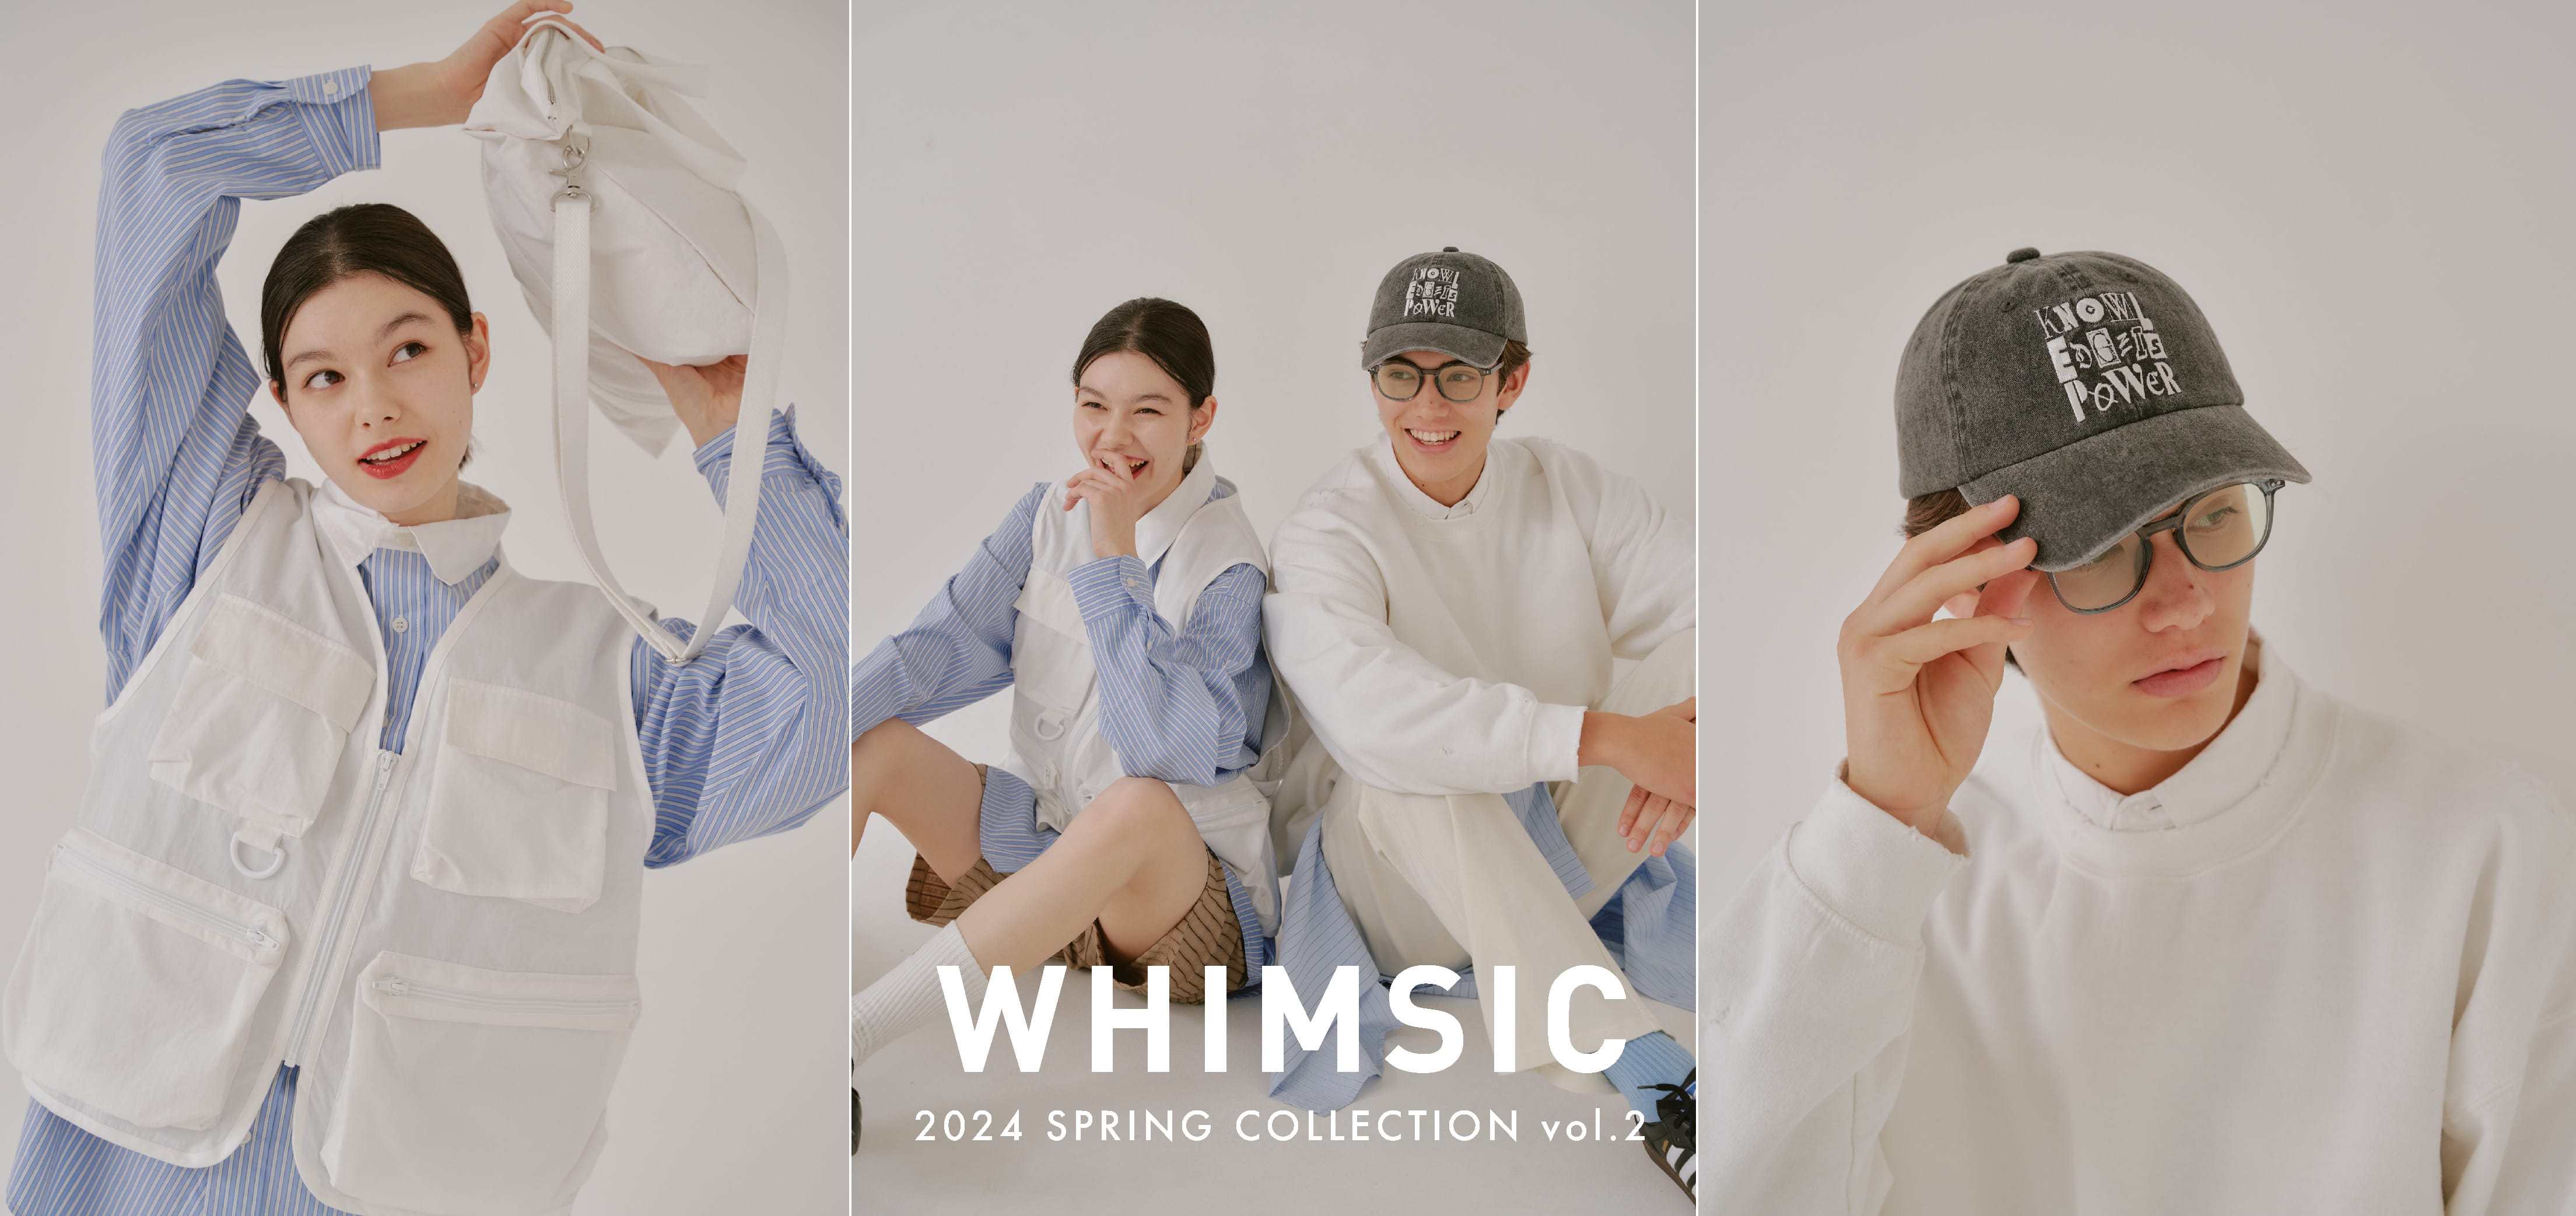 WHIMSIC SPRING COLLECTION vol.2